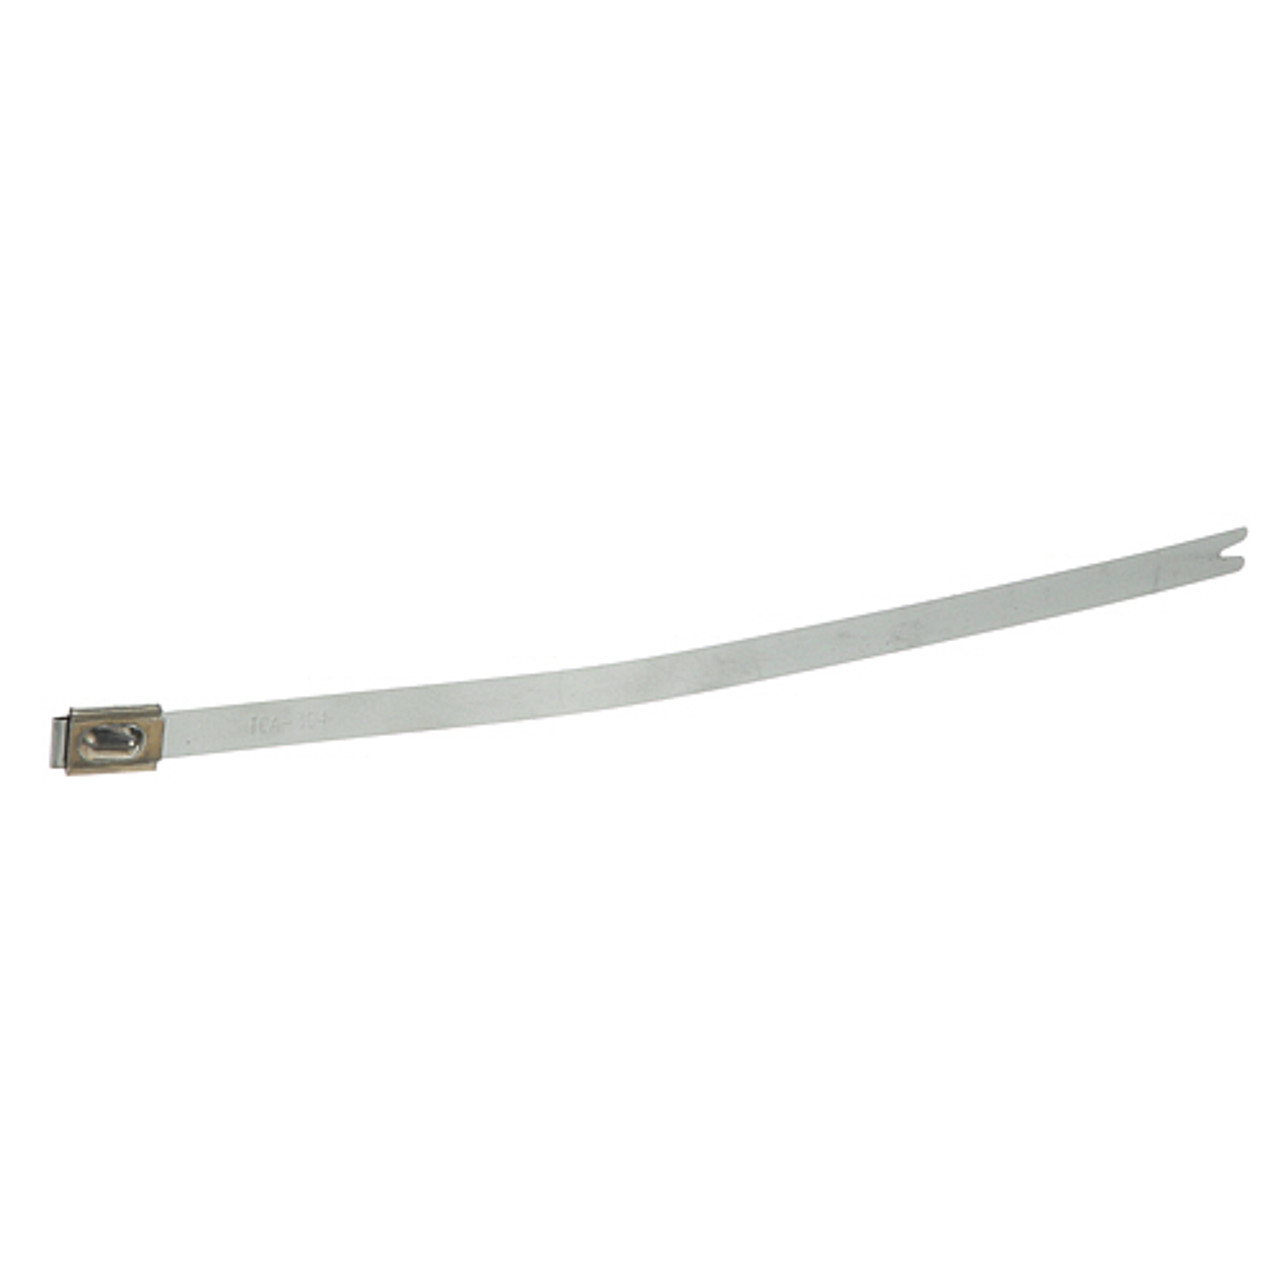 Metal Tie Wrap - Replacement Part For Frymaster FM8090567